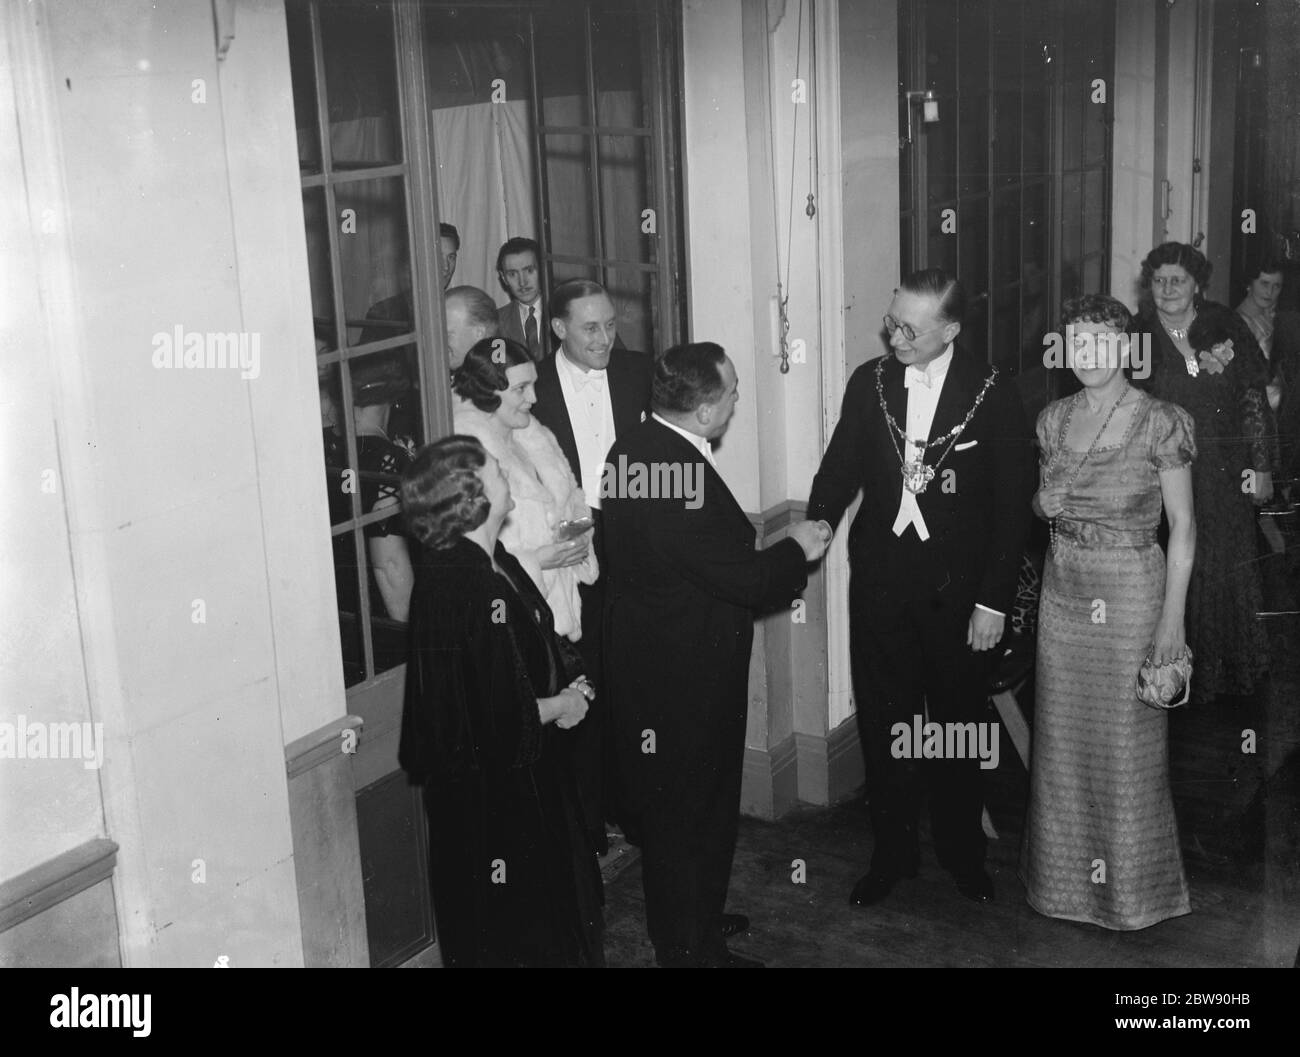 Annual ball Black and White Stock Photos & Images - Alamy